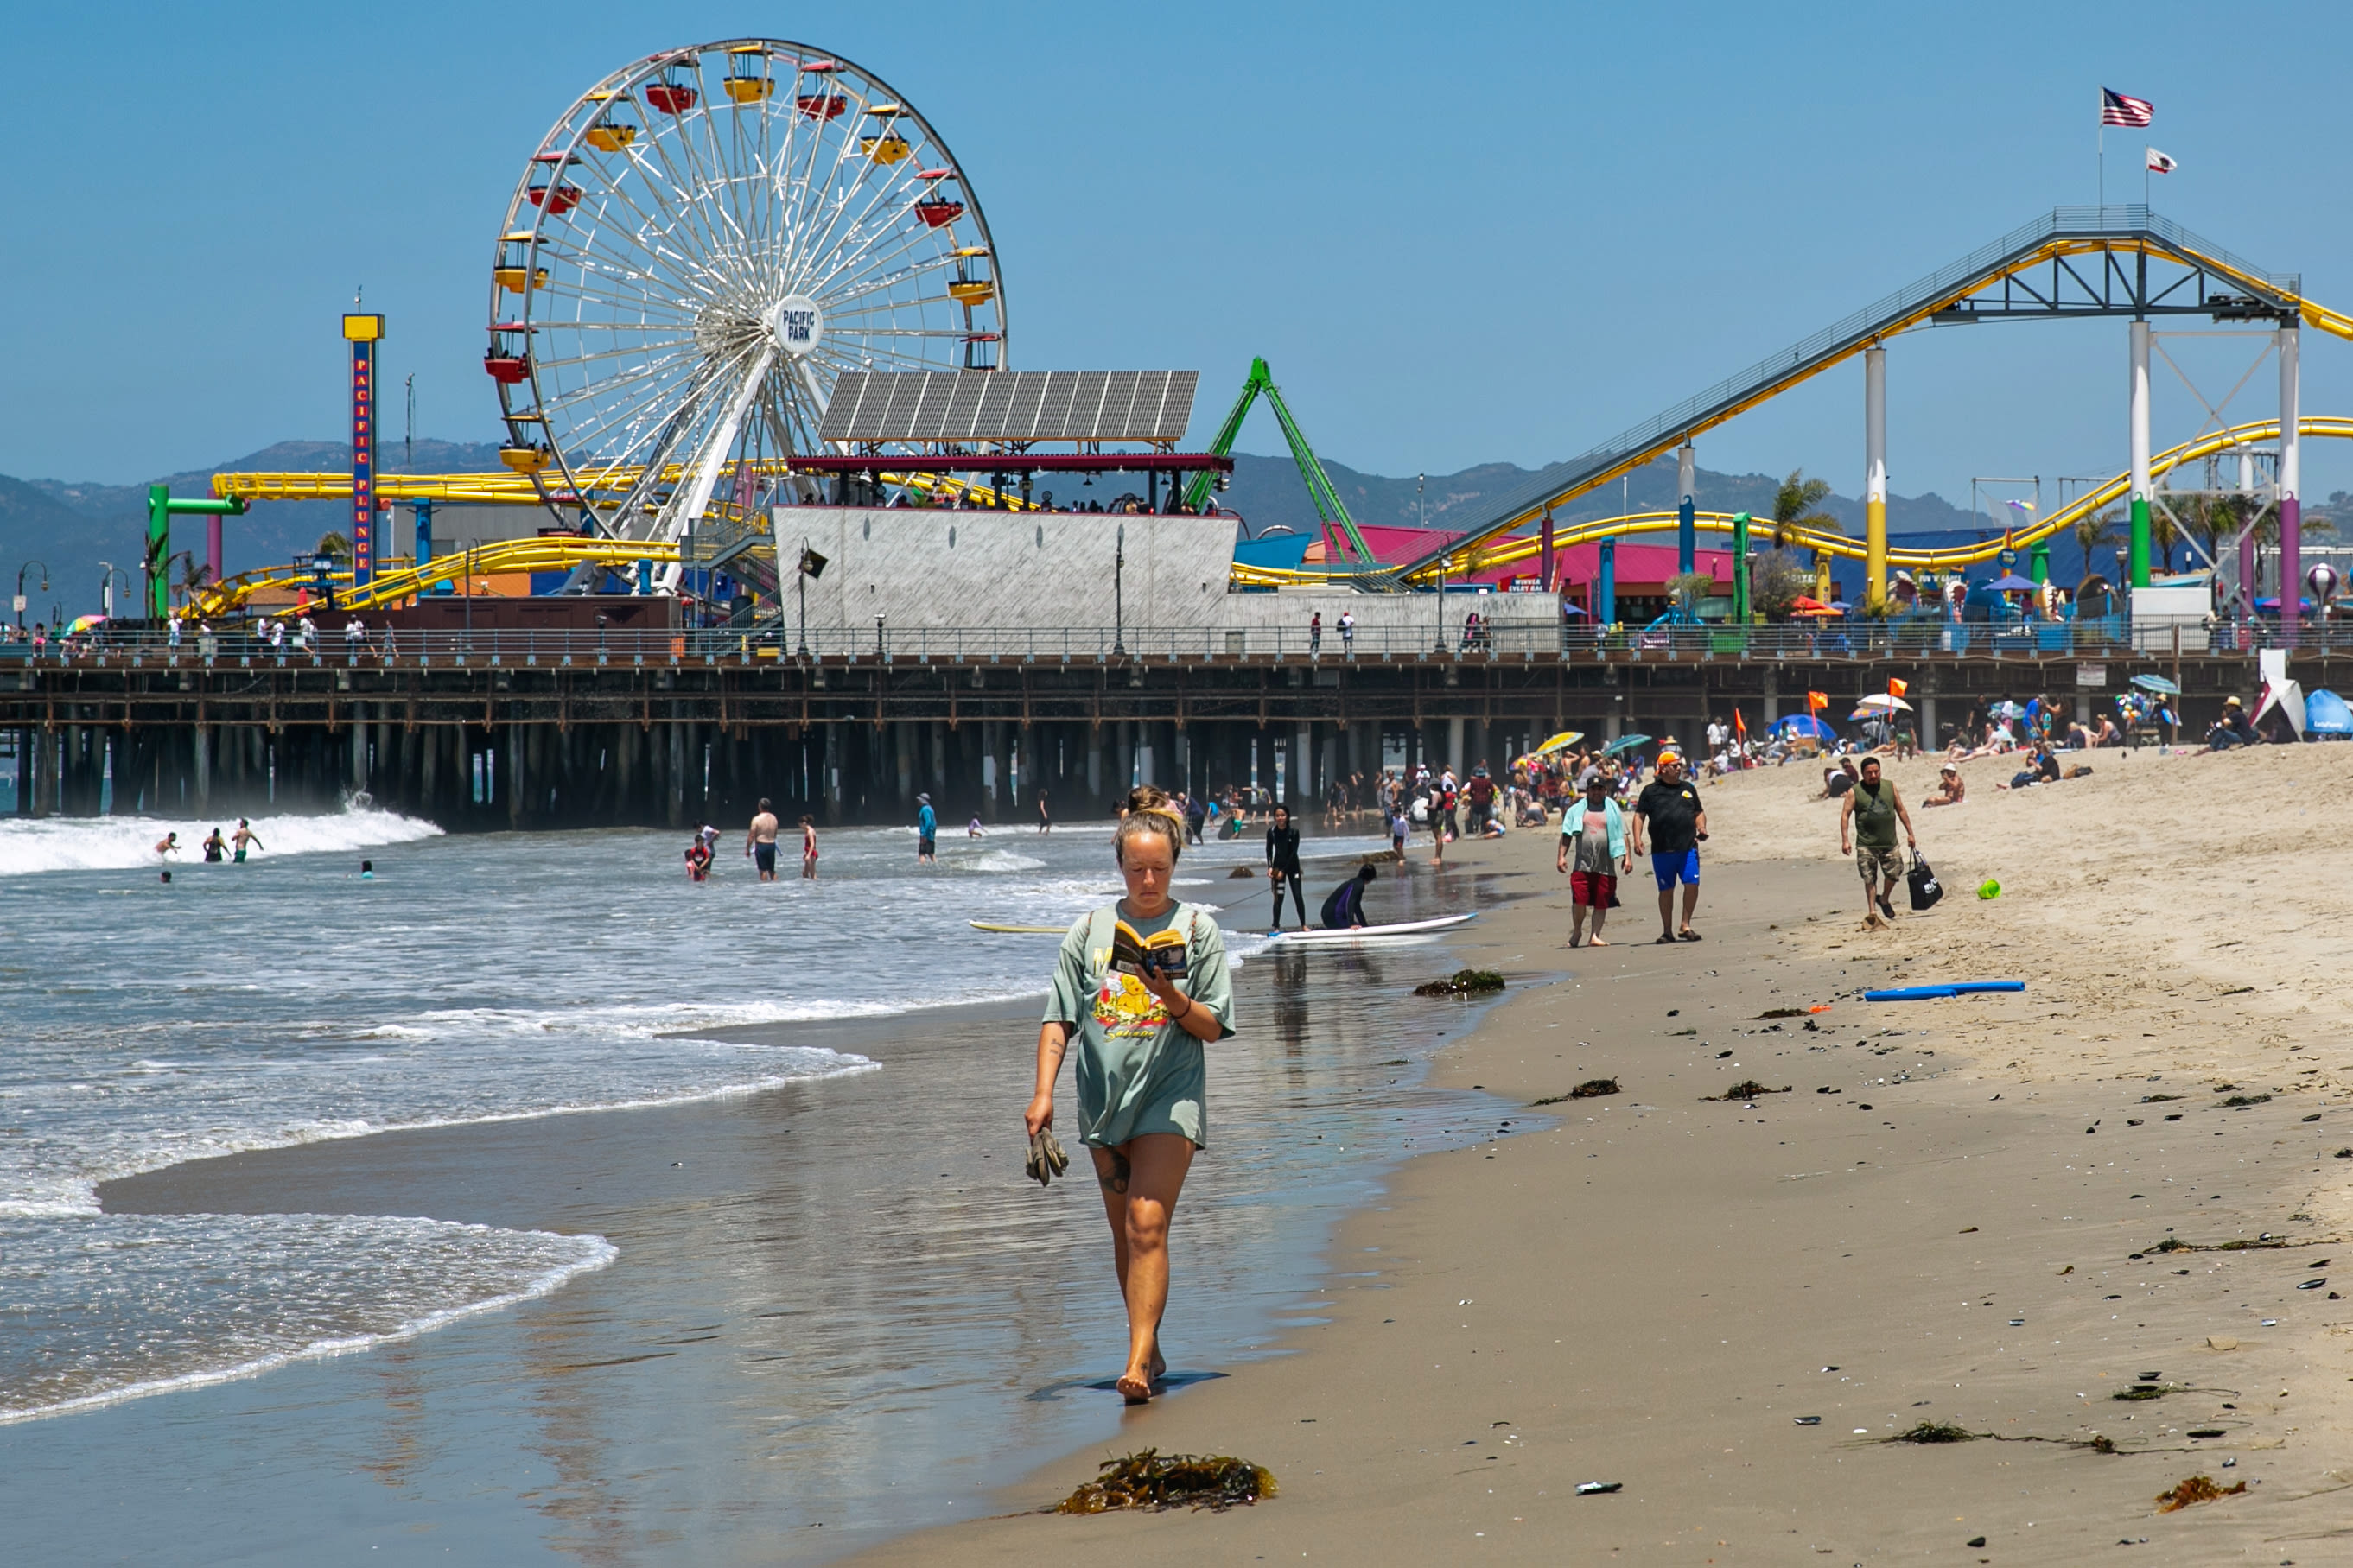 These are California's dirtiest beaches. Where are you swimming this summer?